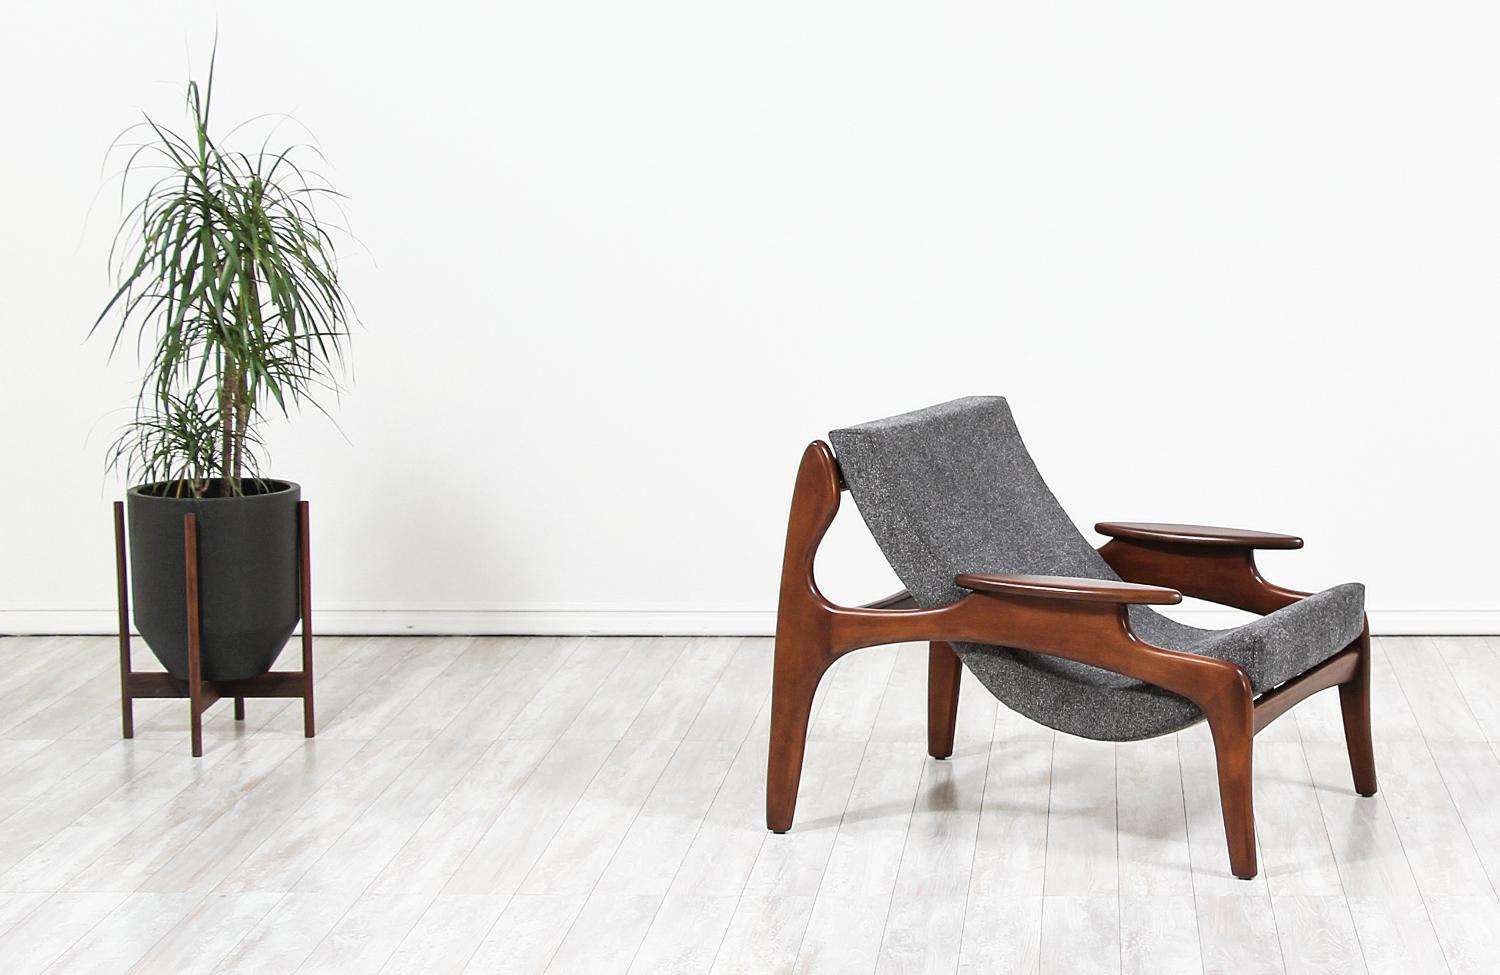 Mid-Century Modern sling chair designed by Adrian Pearsall for craft associates in the United States, circa 1960s. This iconic and rare to find model 804-C chair features a solid walnut wood frame with new rubber Pirelli webbing that supports the